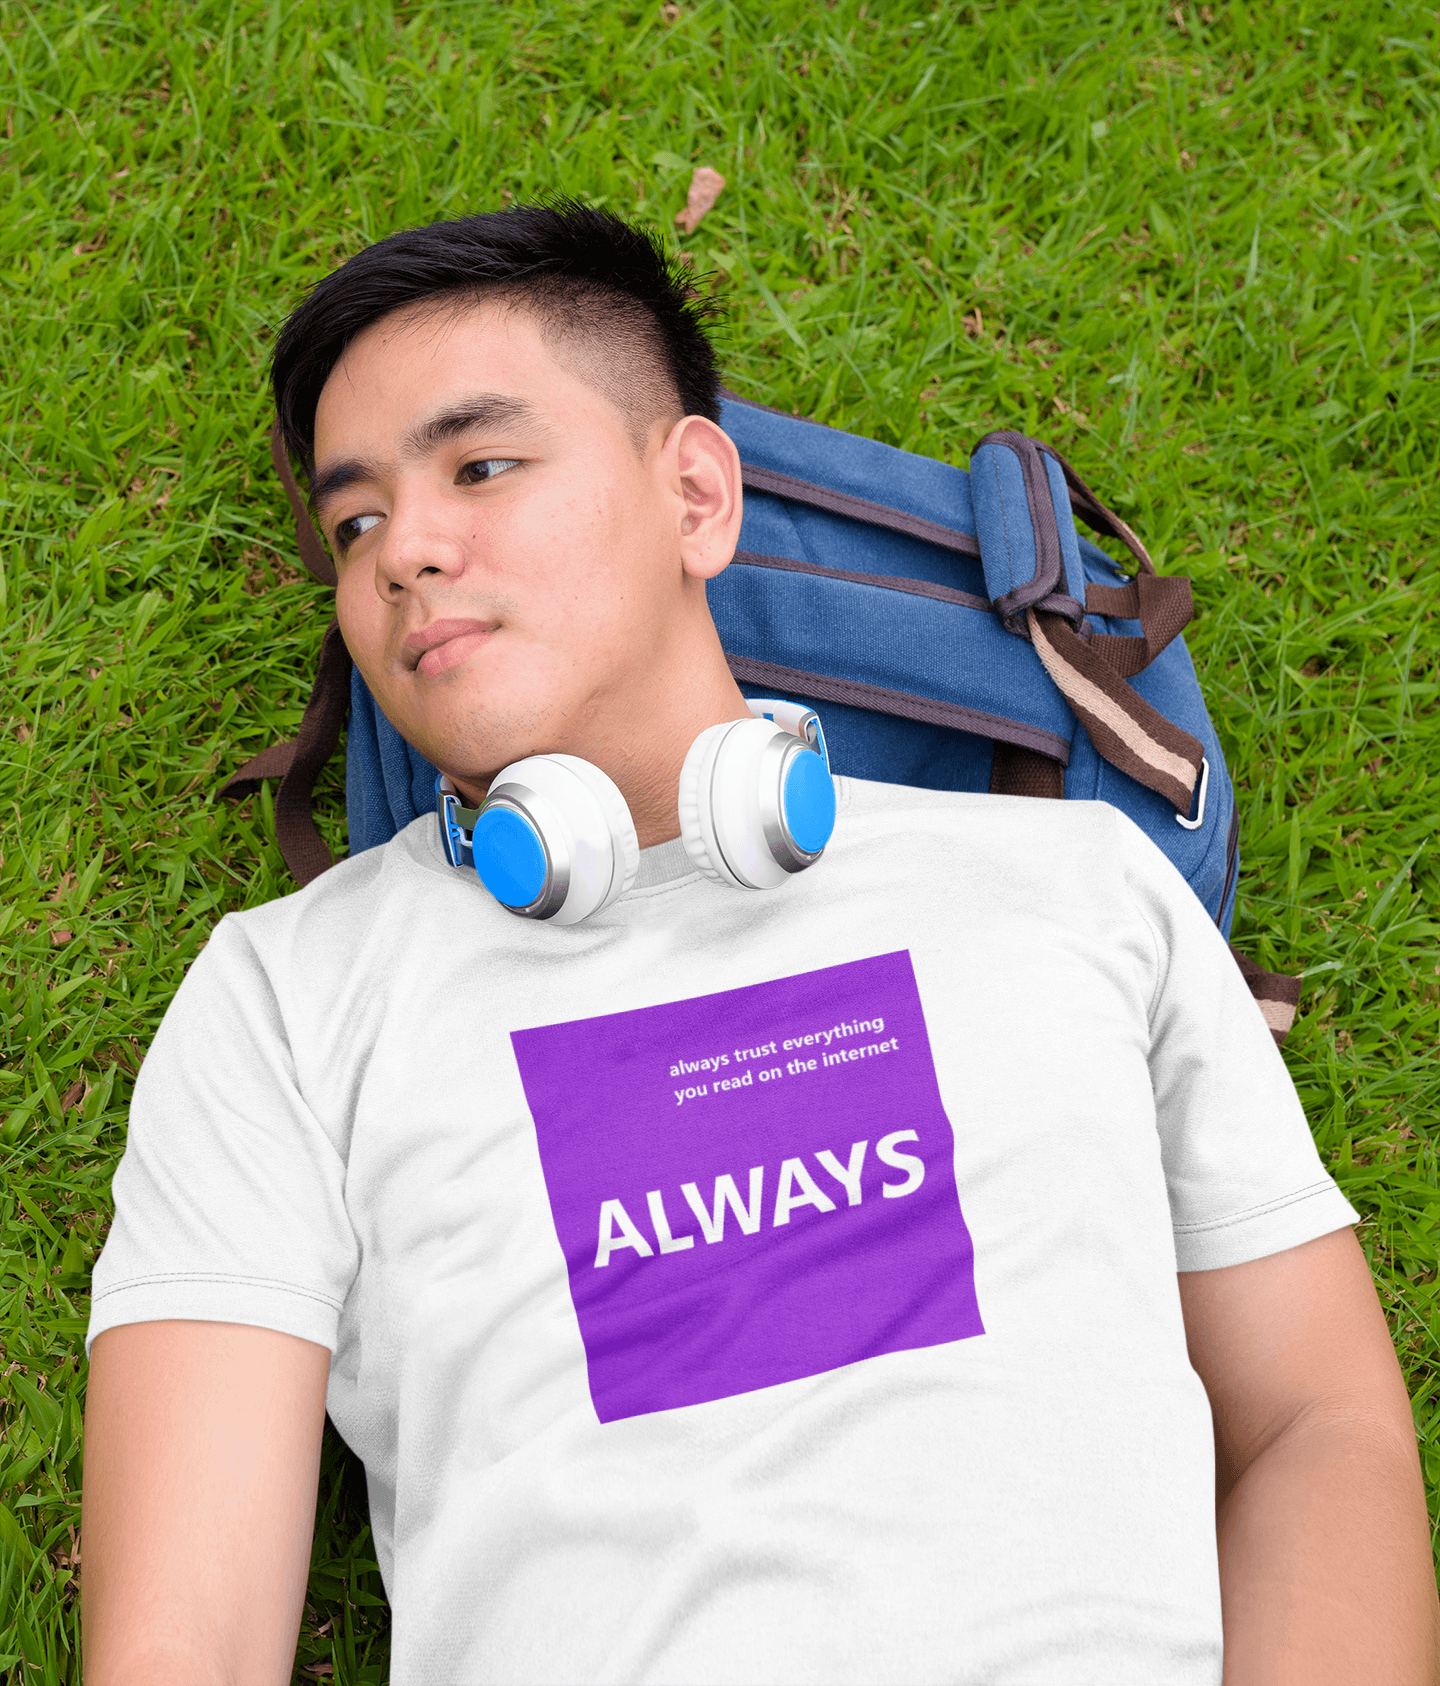 young man lying on grass with headphones and slogan t-shirt